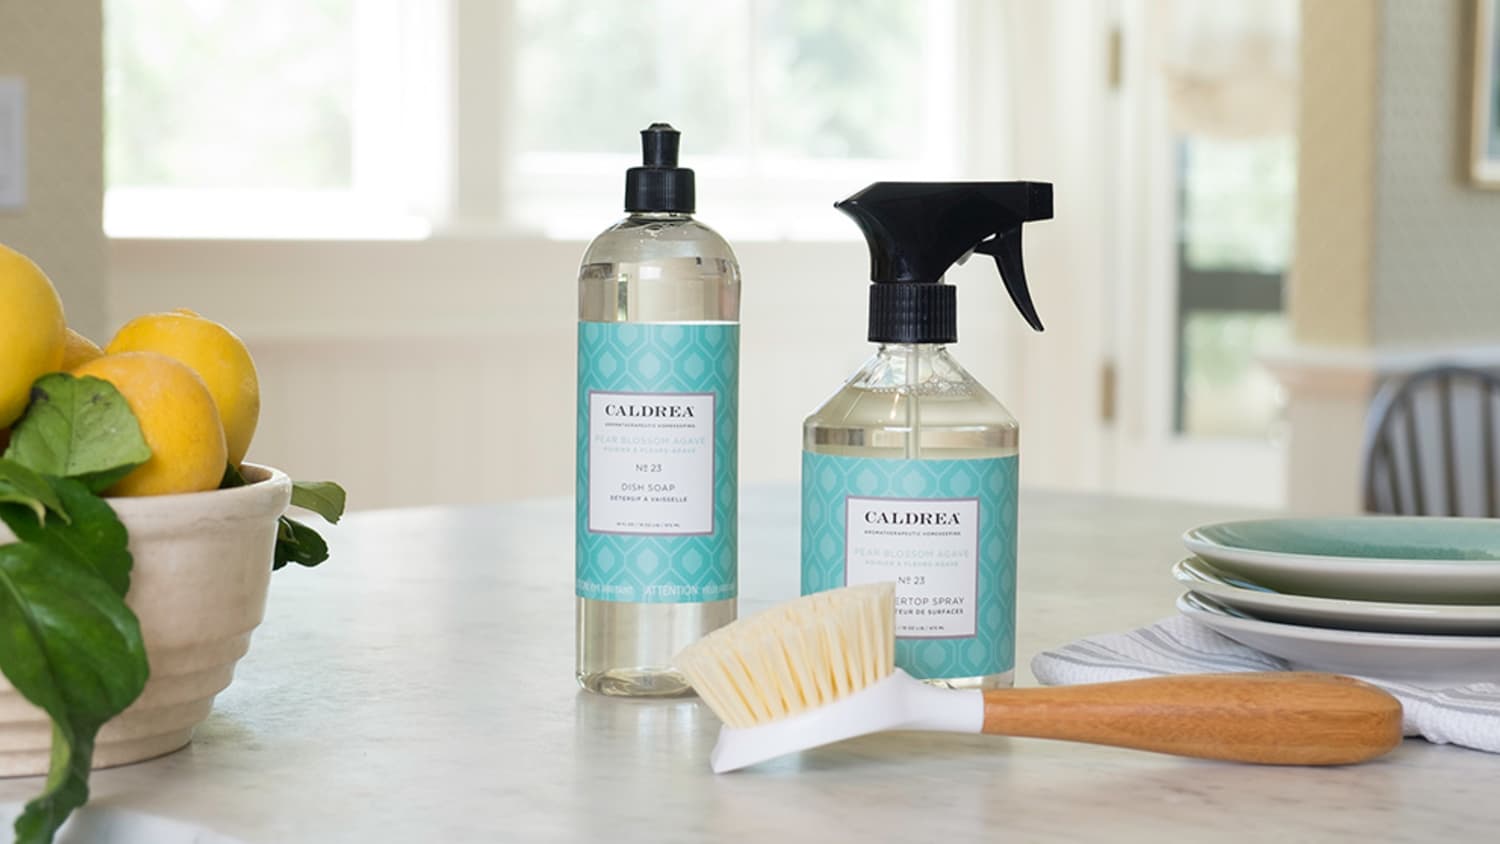 Best Cleaning Products - House Of Hipsters